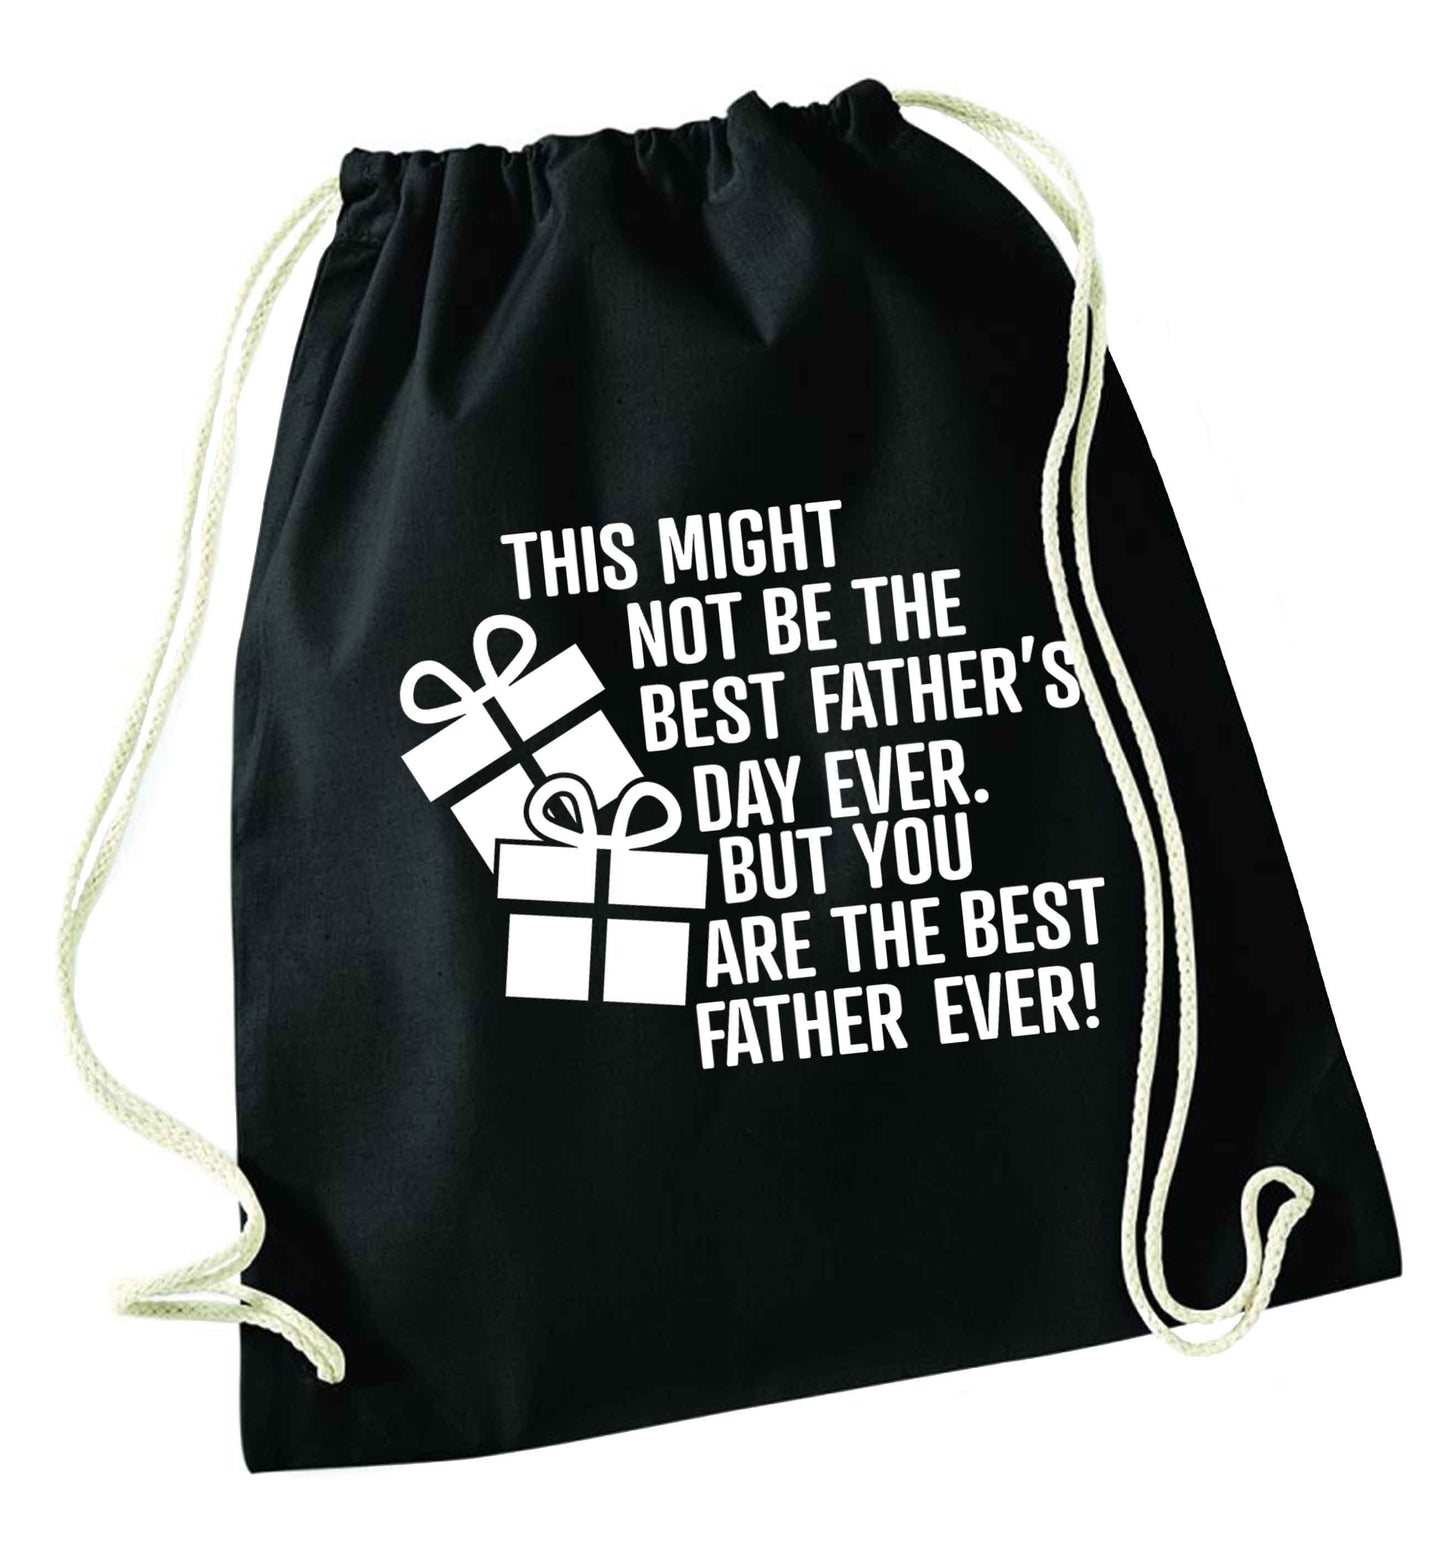 It might not be the best Father's Day ever but you are the best father ever! black drawstring bag